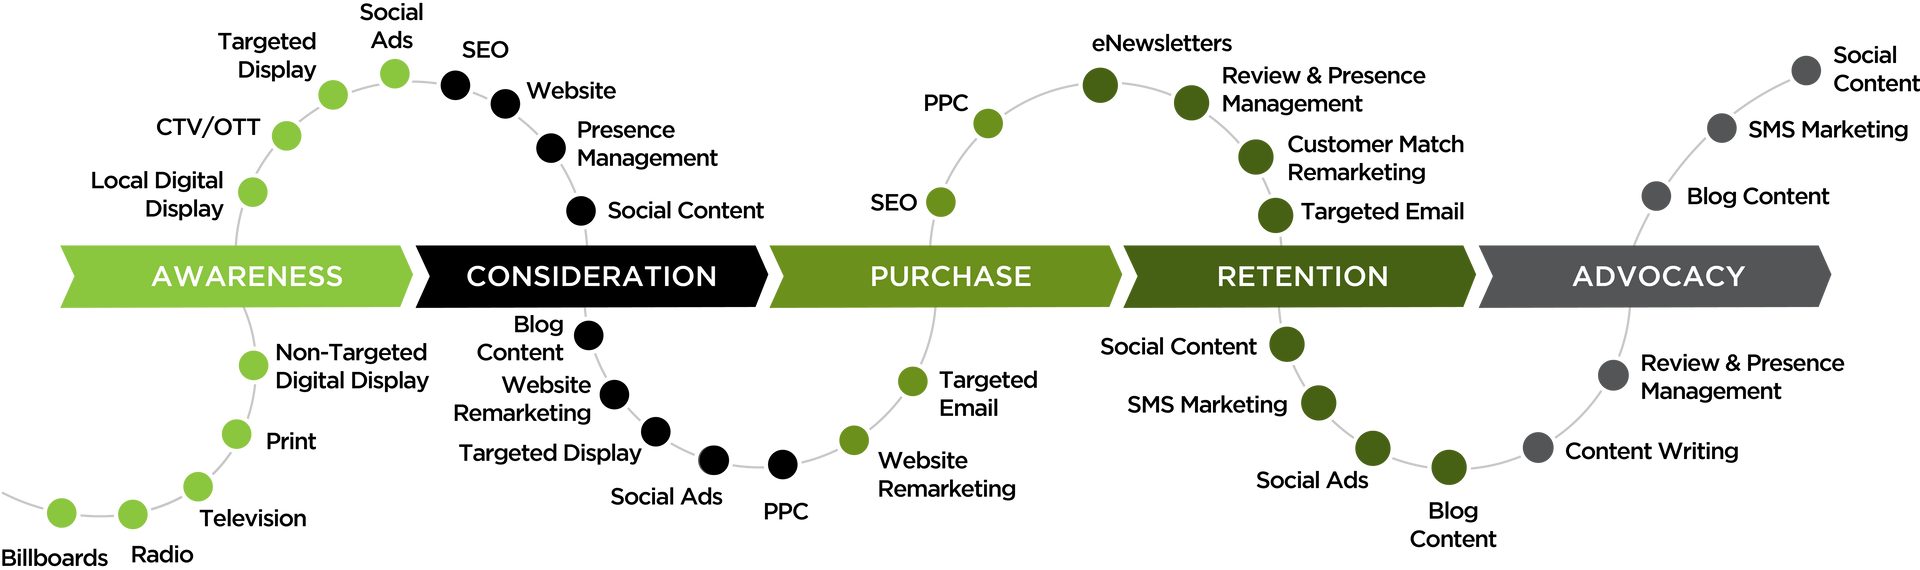 a diagram showing the stages of a business process and custom journey